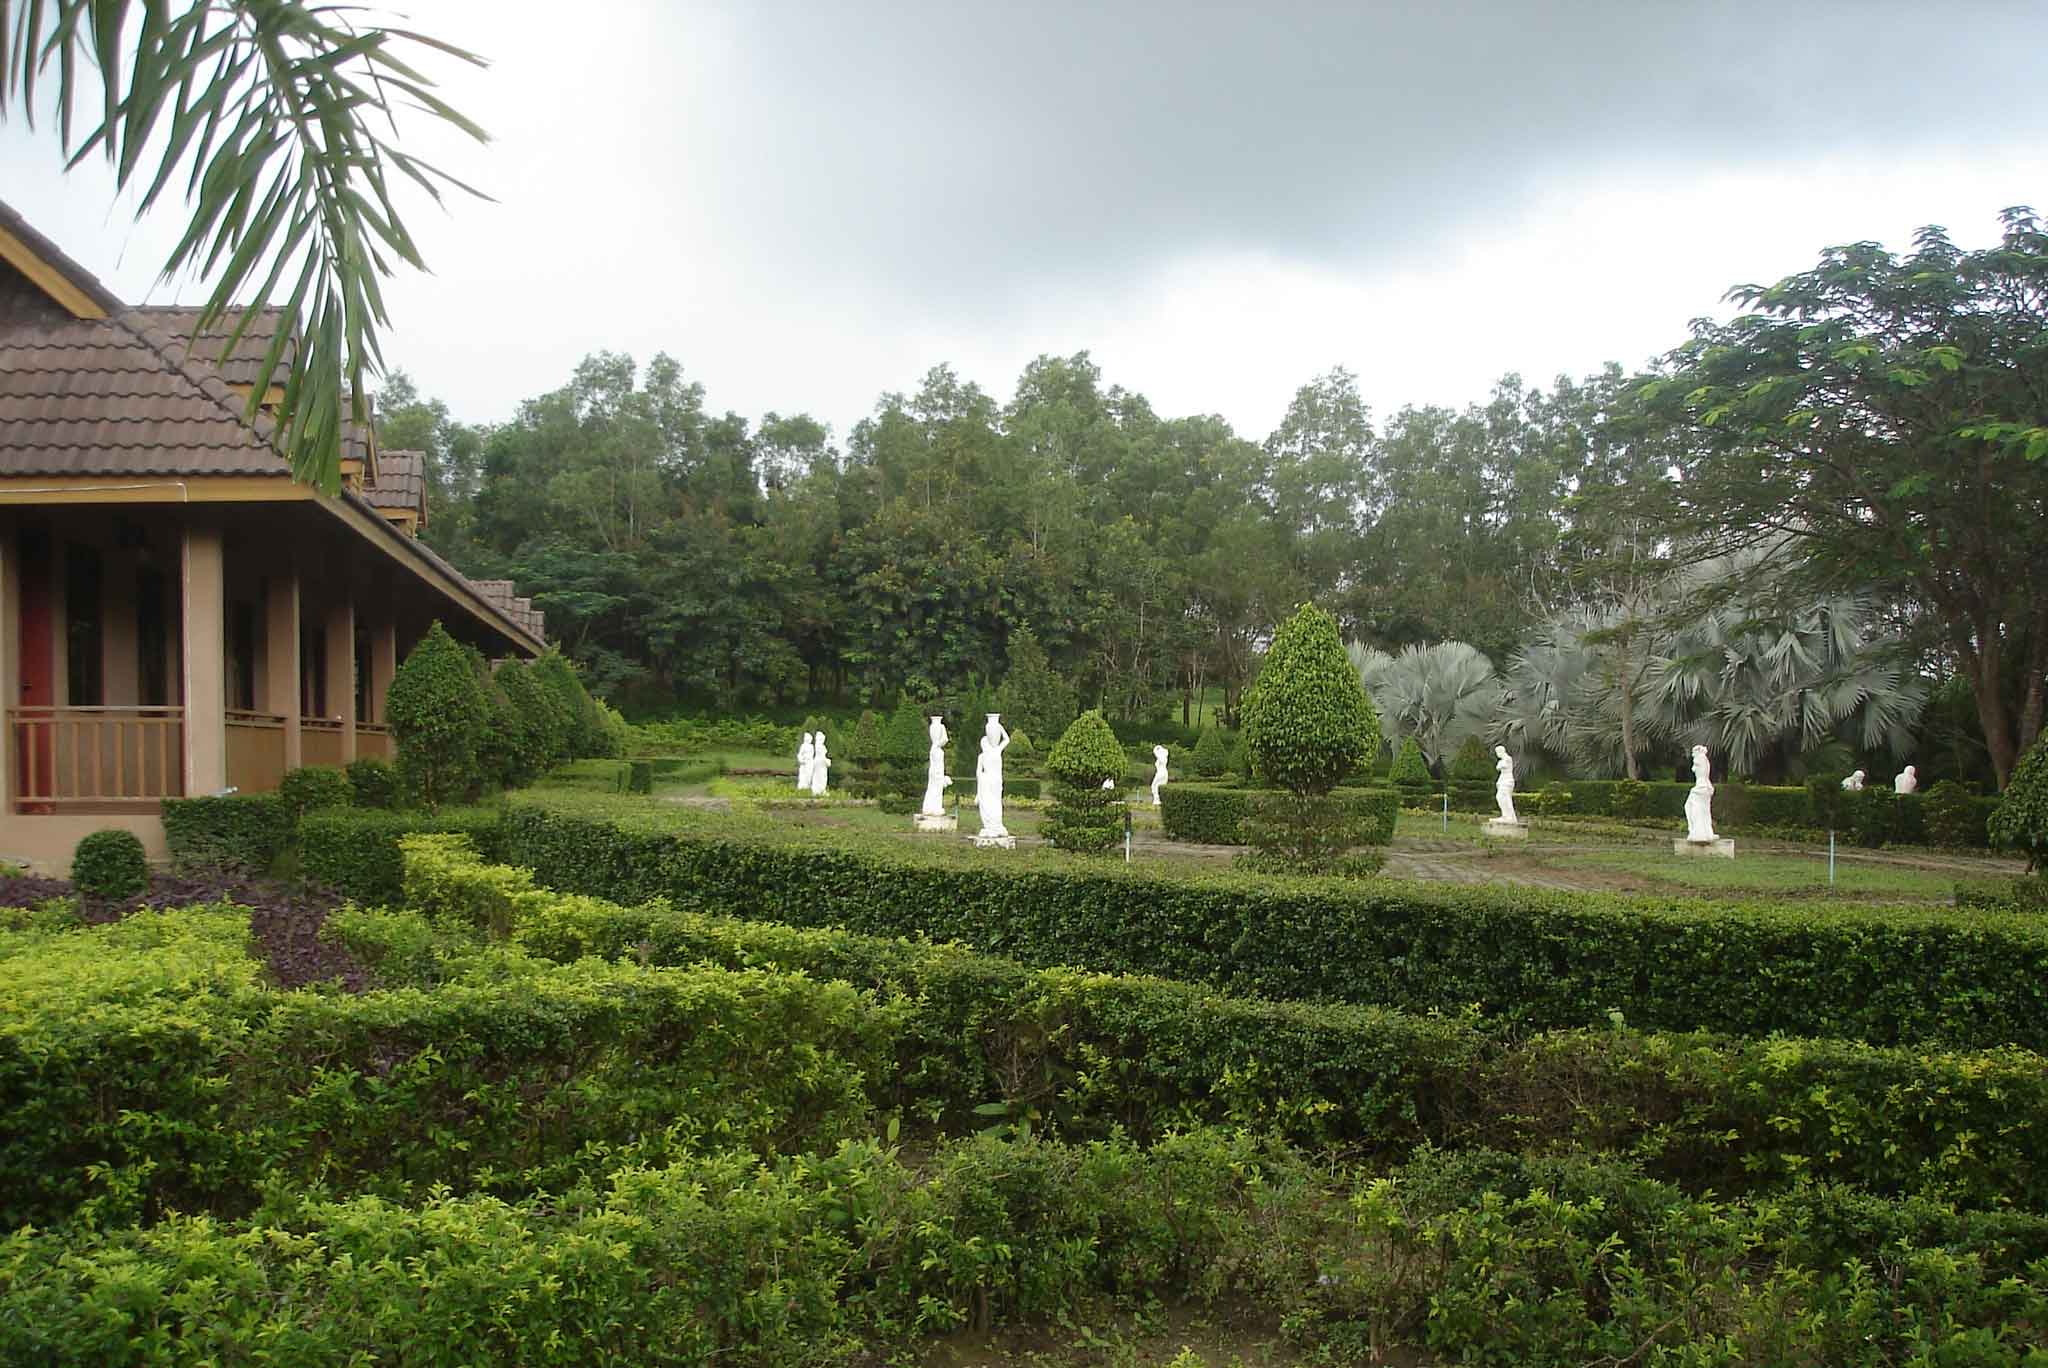 Secluded Self-contained Bungalows,green manicured gardens with statues